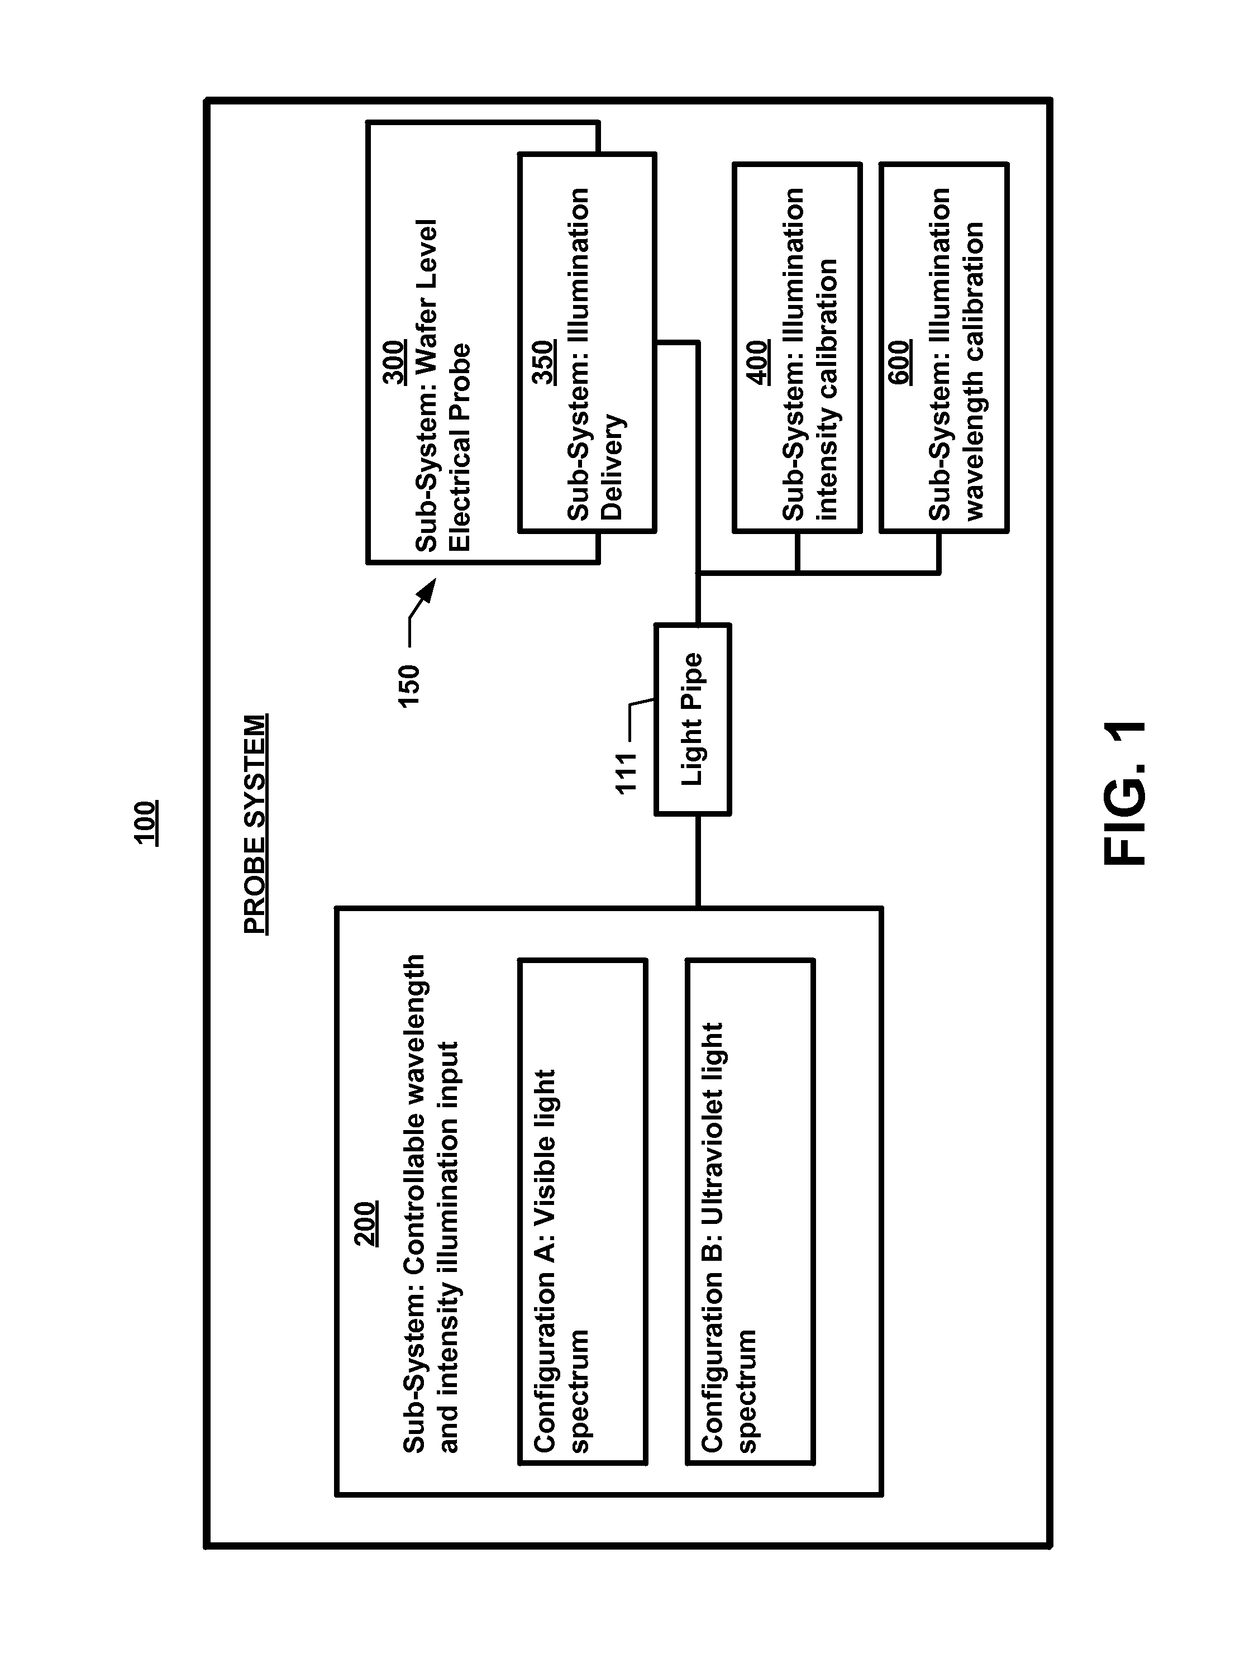 Wafer level electrical probe system with multiple wavelength and intensity illumination capability system